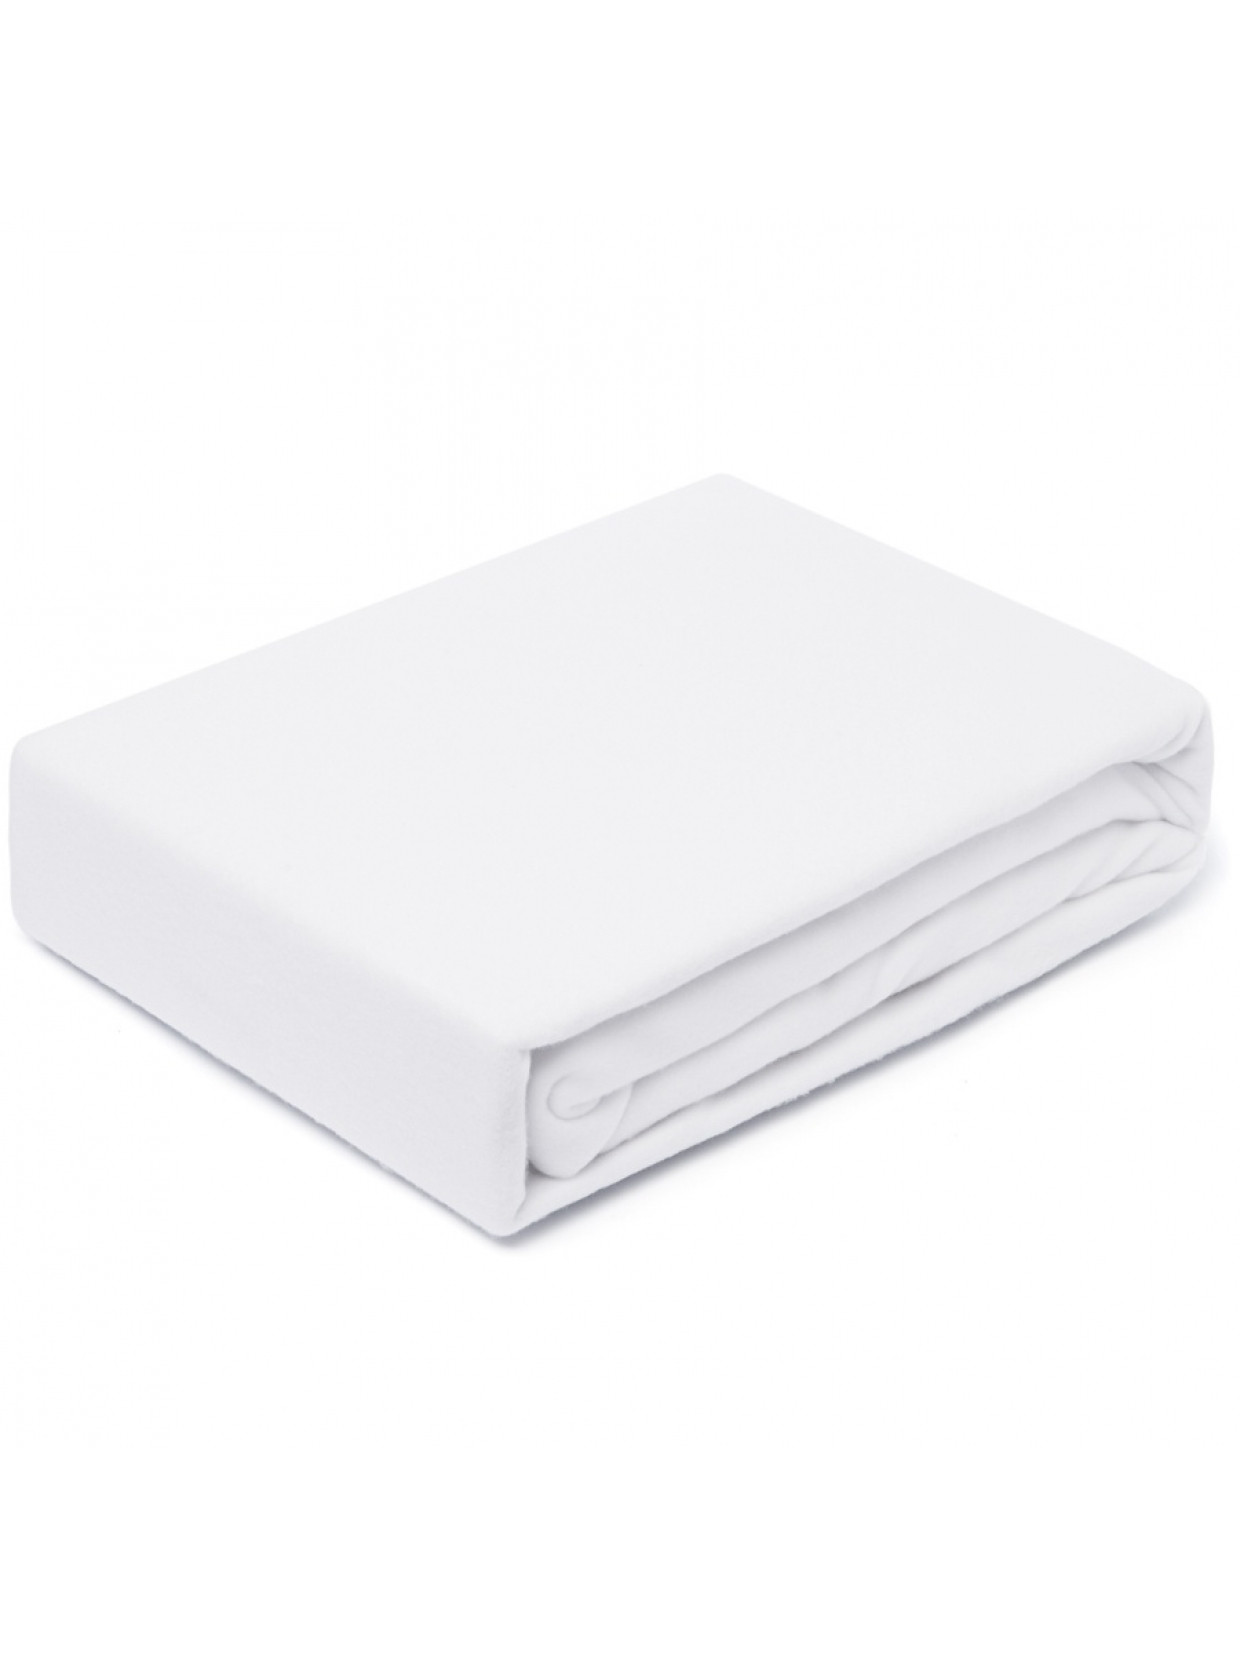 Rent a Fitted sheet 1 person 140x200? Rent at KeyPro furniture rental!